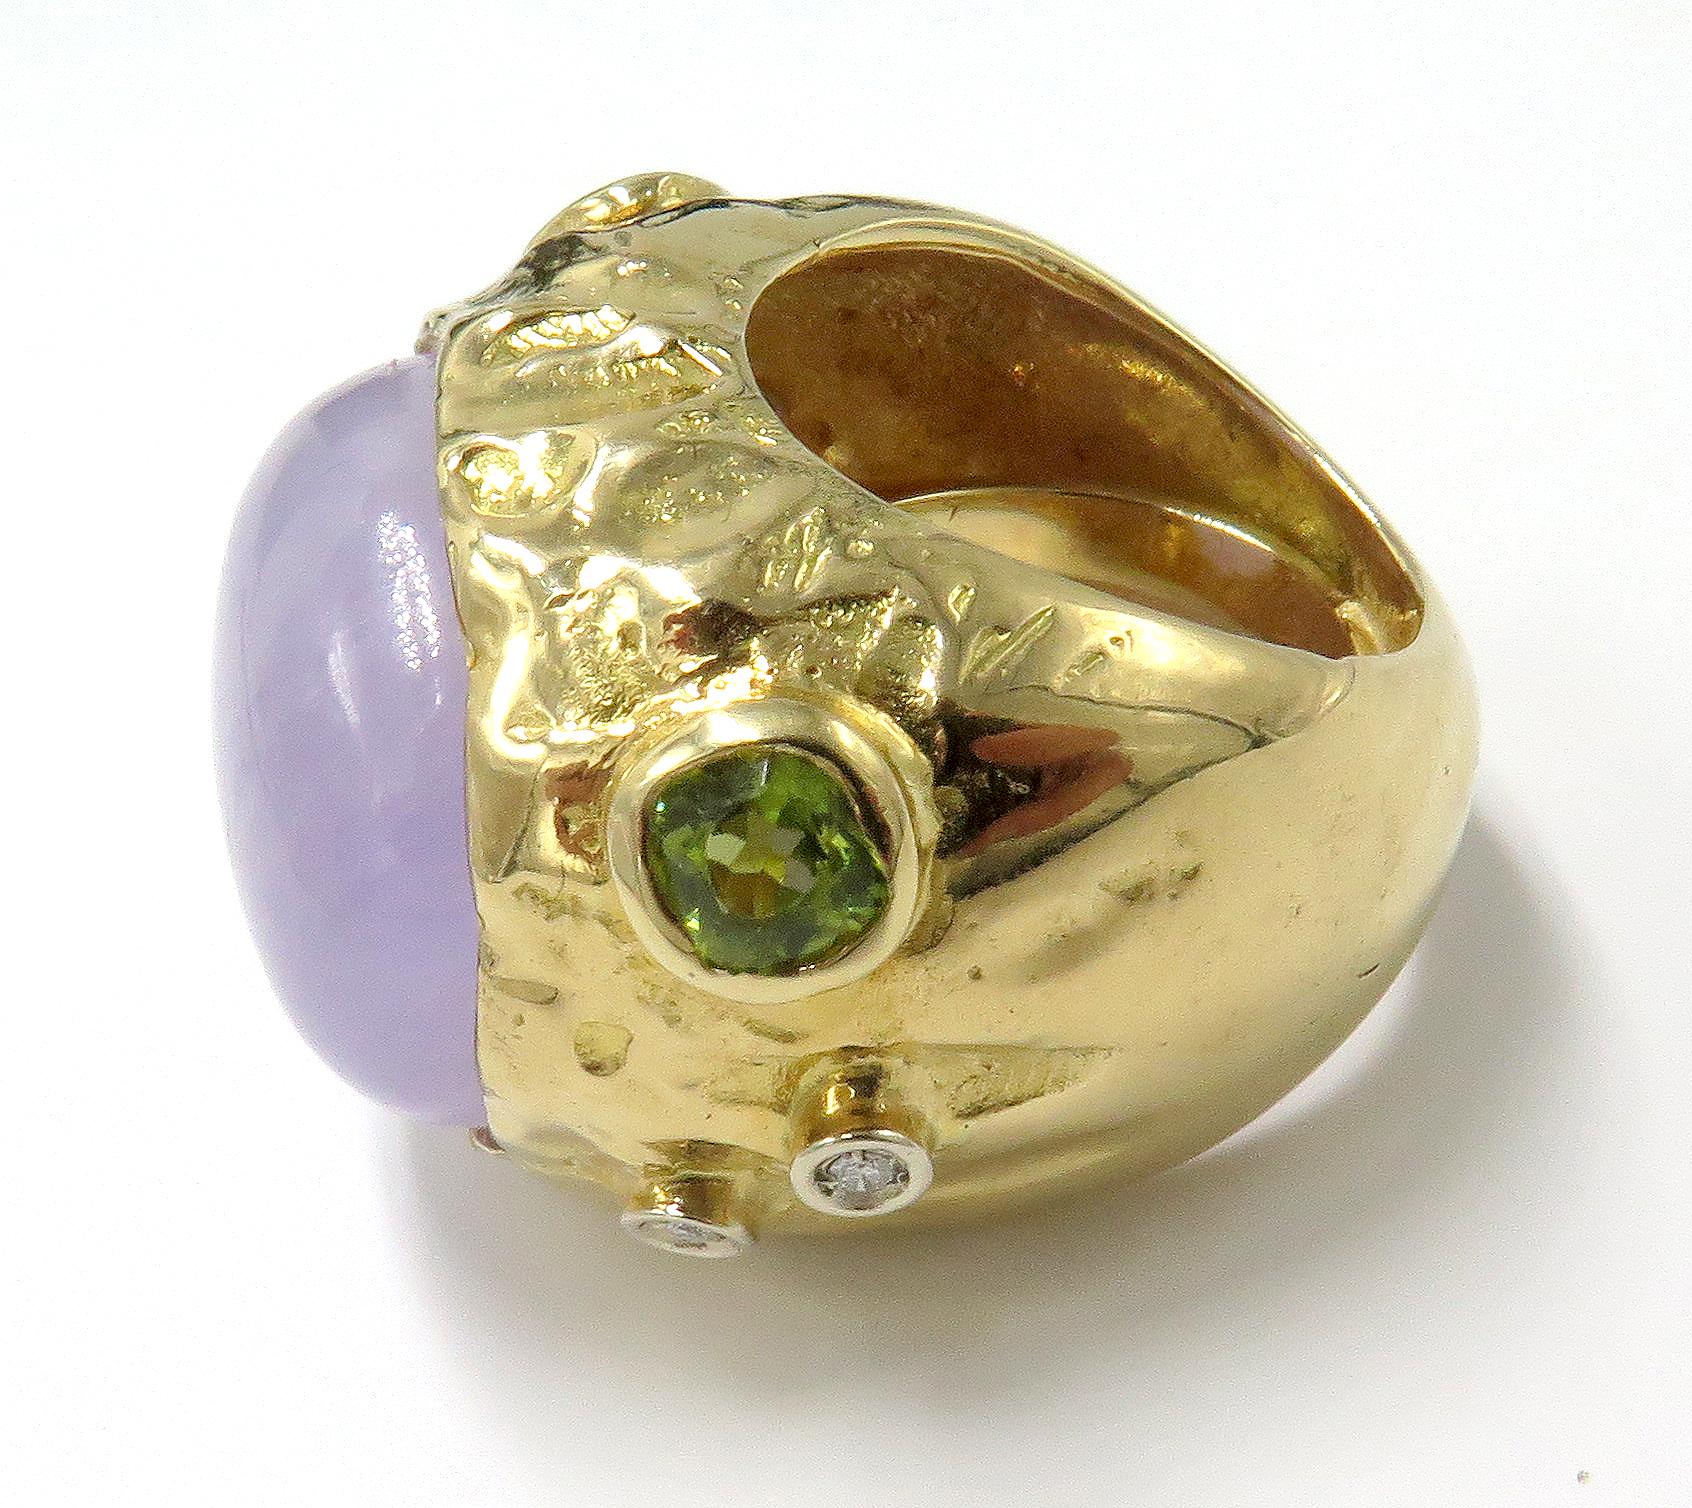 This, is a gorgeous and beautiful 18k ring that features a beautiful lavender jade in the center of the ring. This, ring is crafted in 18K yellow gold with a combination of a polished and hammered finish. On the sides of the ring there is an array